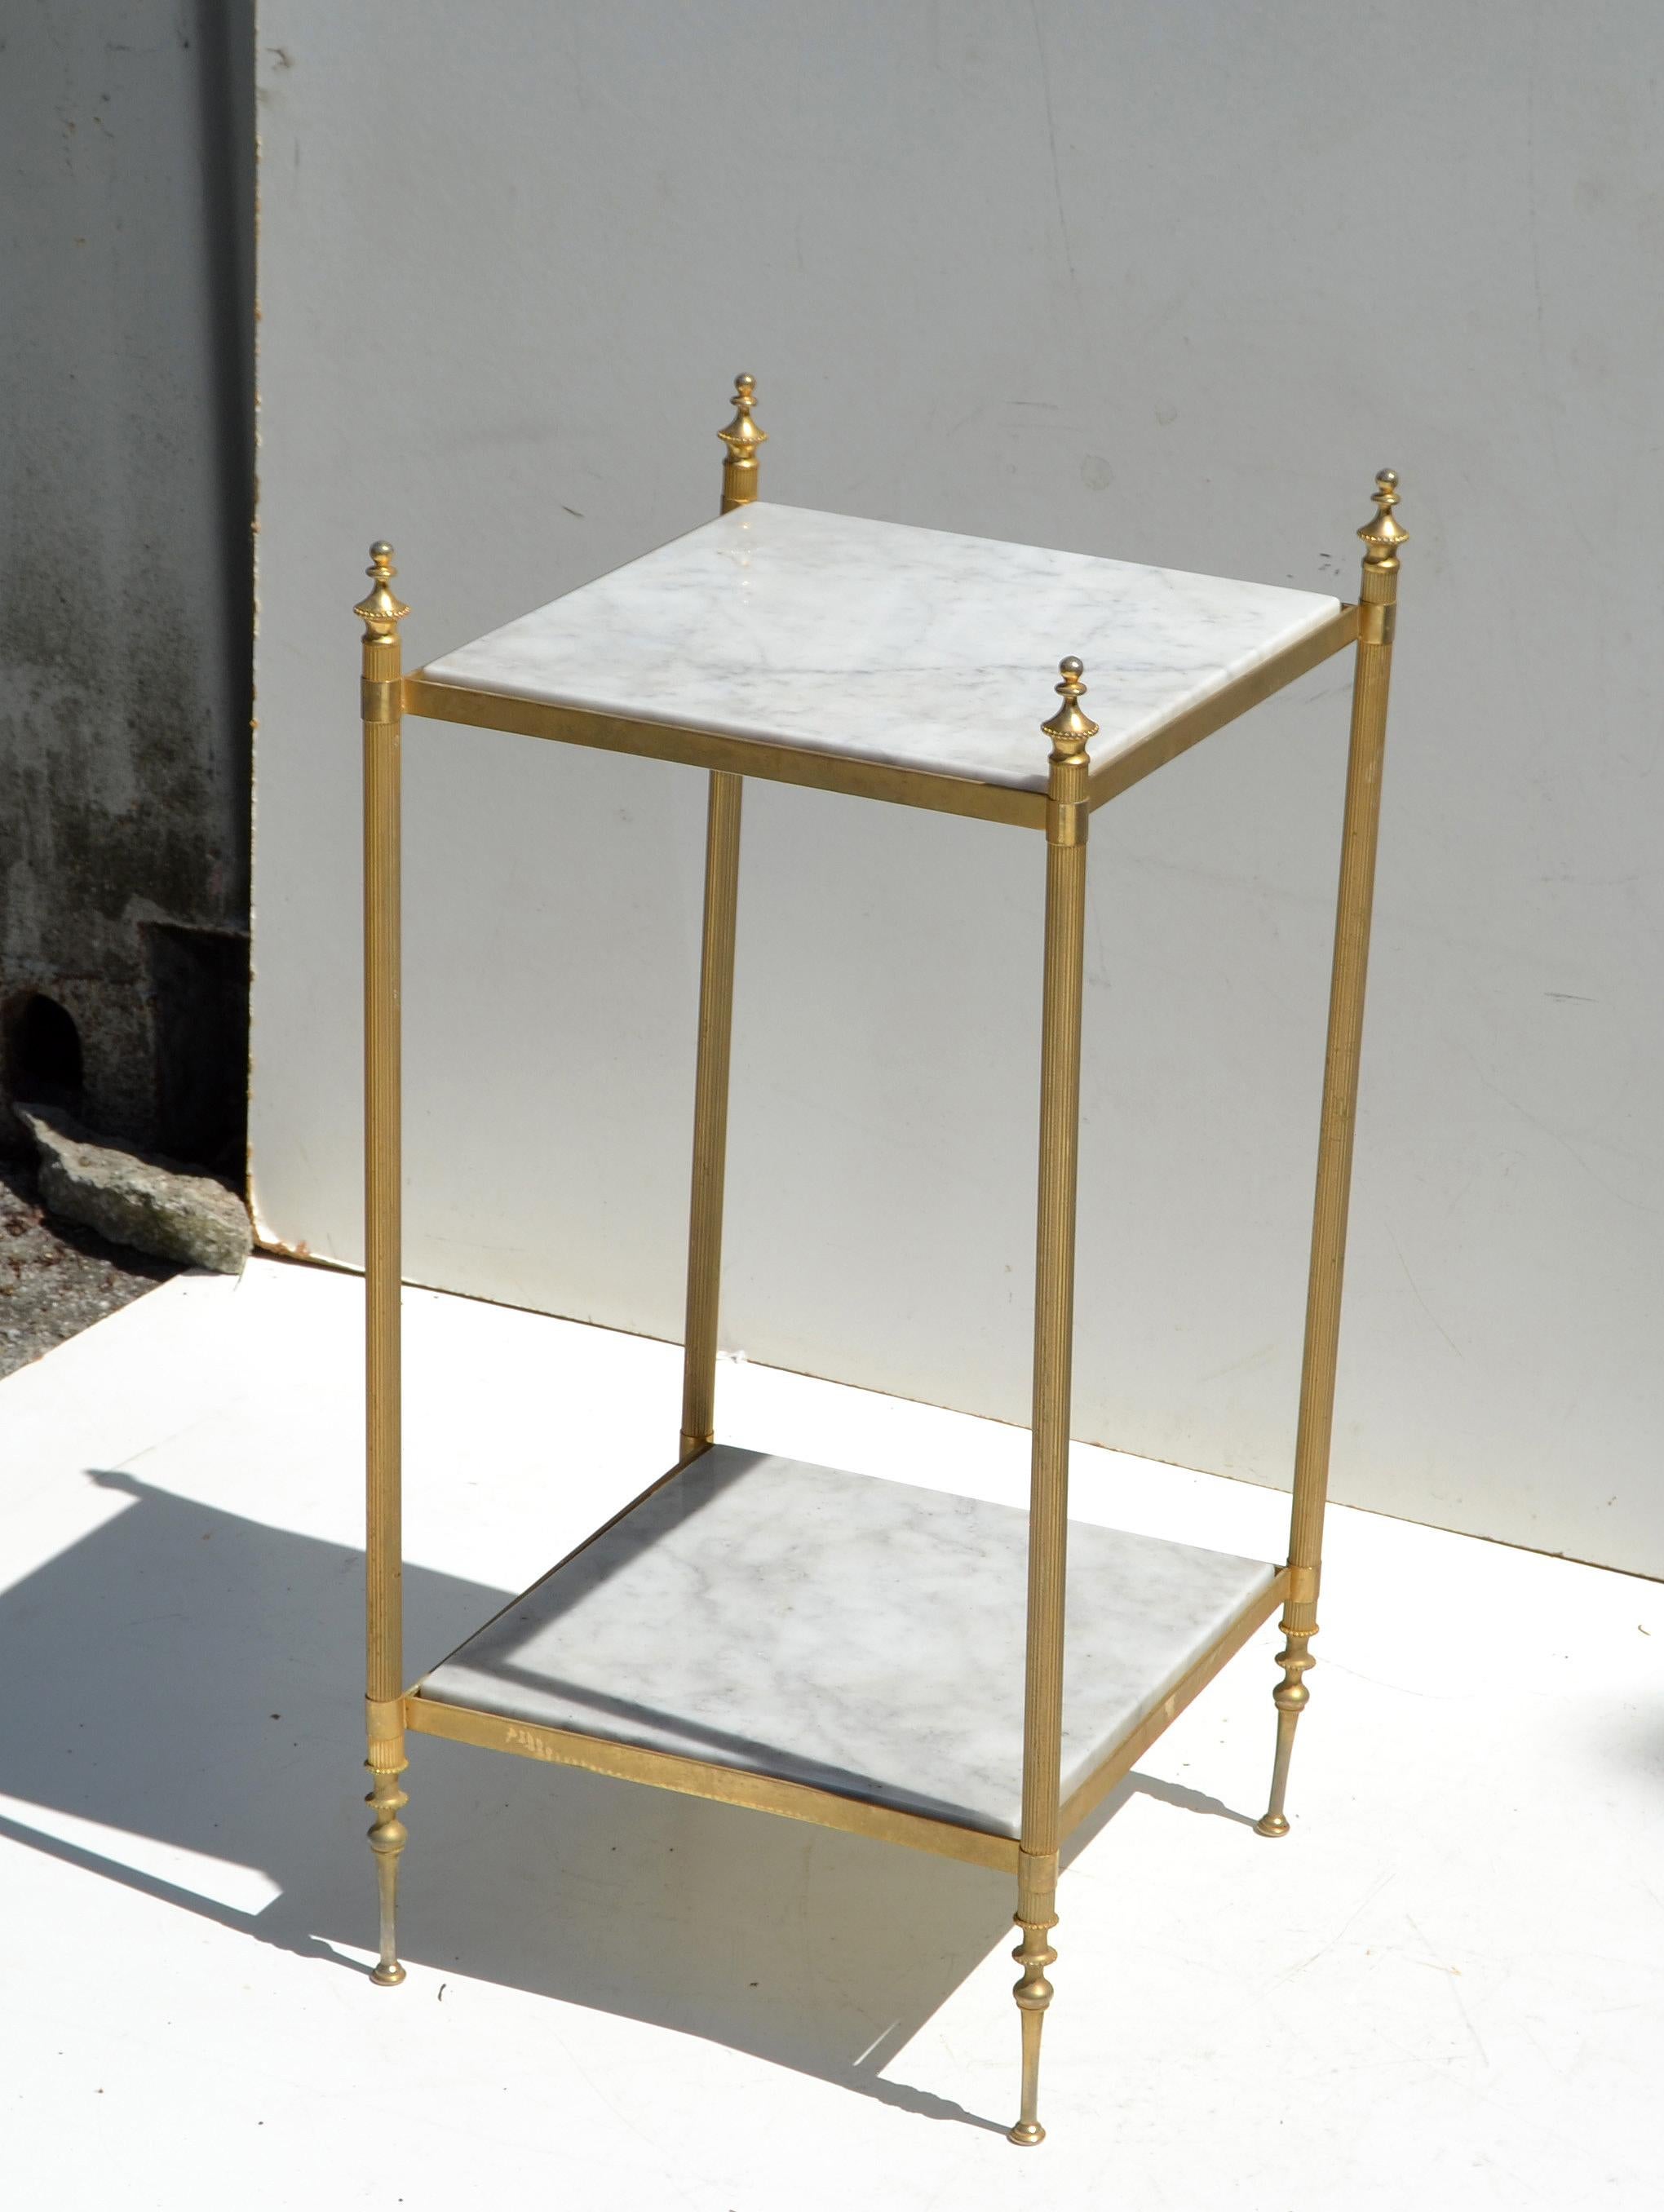 Superb pair of side table by Maison Jansen neoclassical made in France circa 1960.
Brass with antique white marble top.
Great also as sofa or end table.
Marble top measure: 11.5 x 11.5 x 0.25 inches.